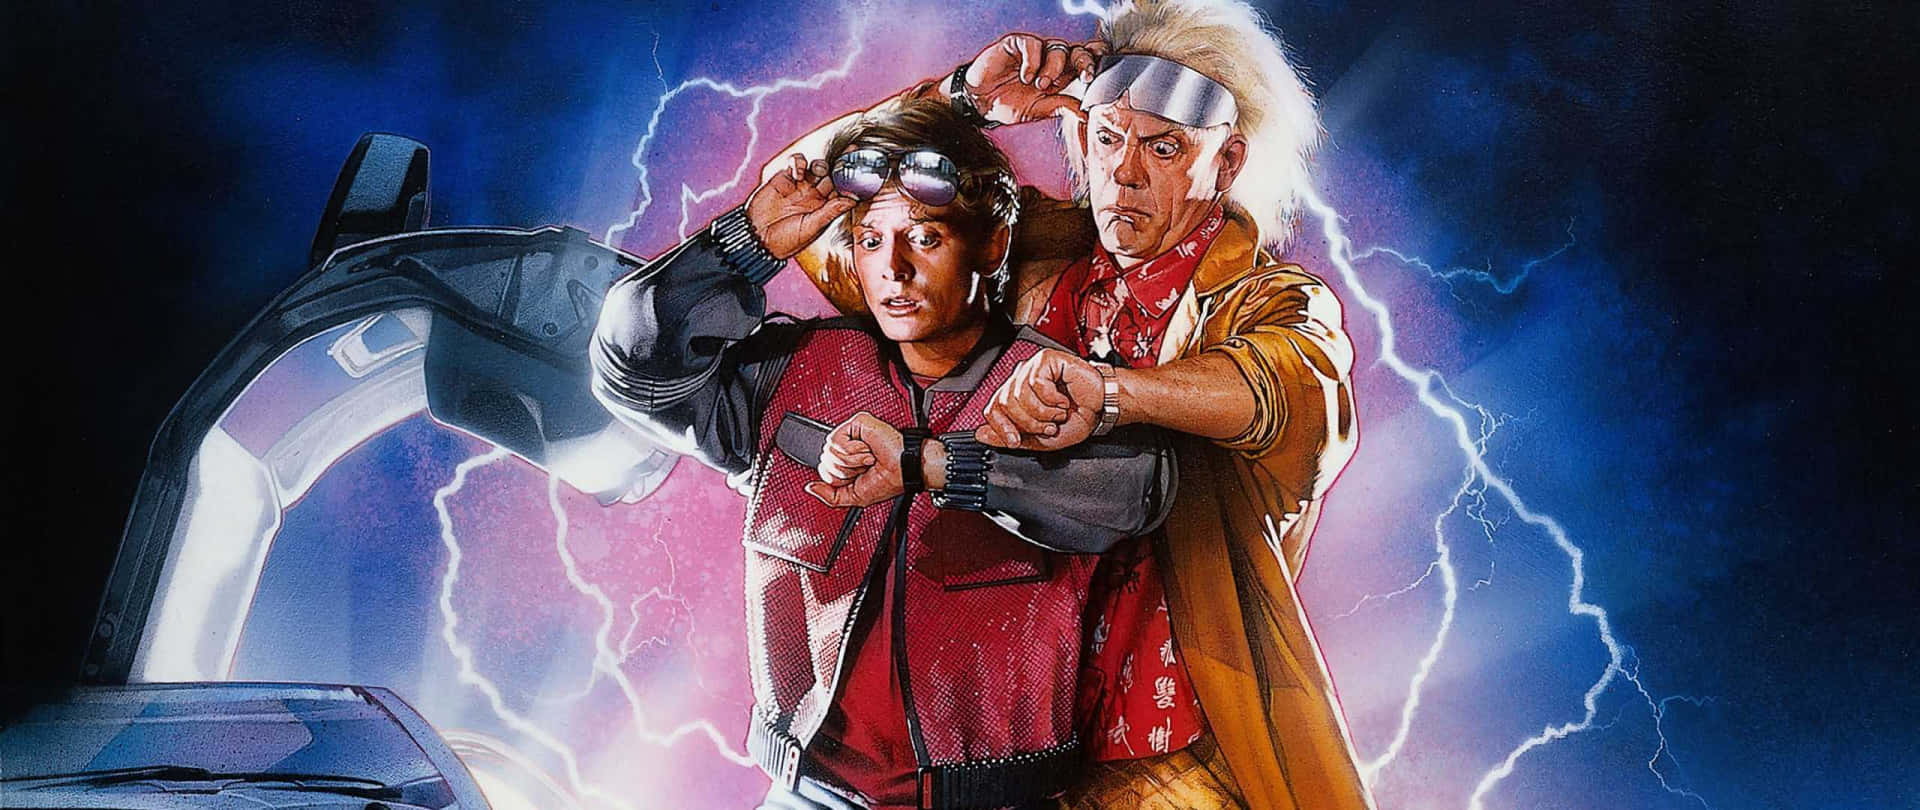 Back To The Future - The Movie Poster